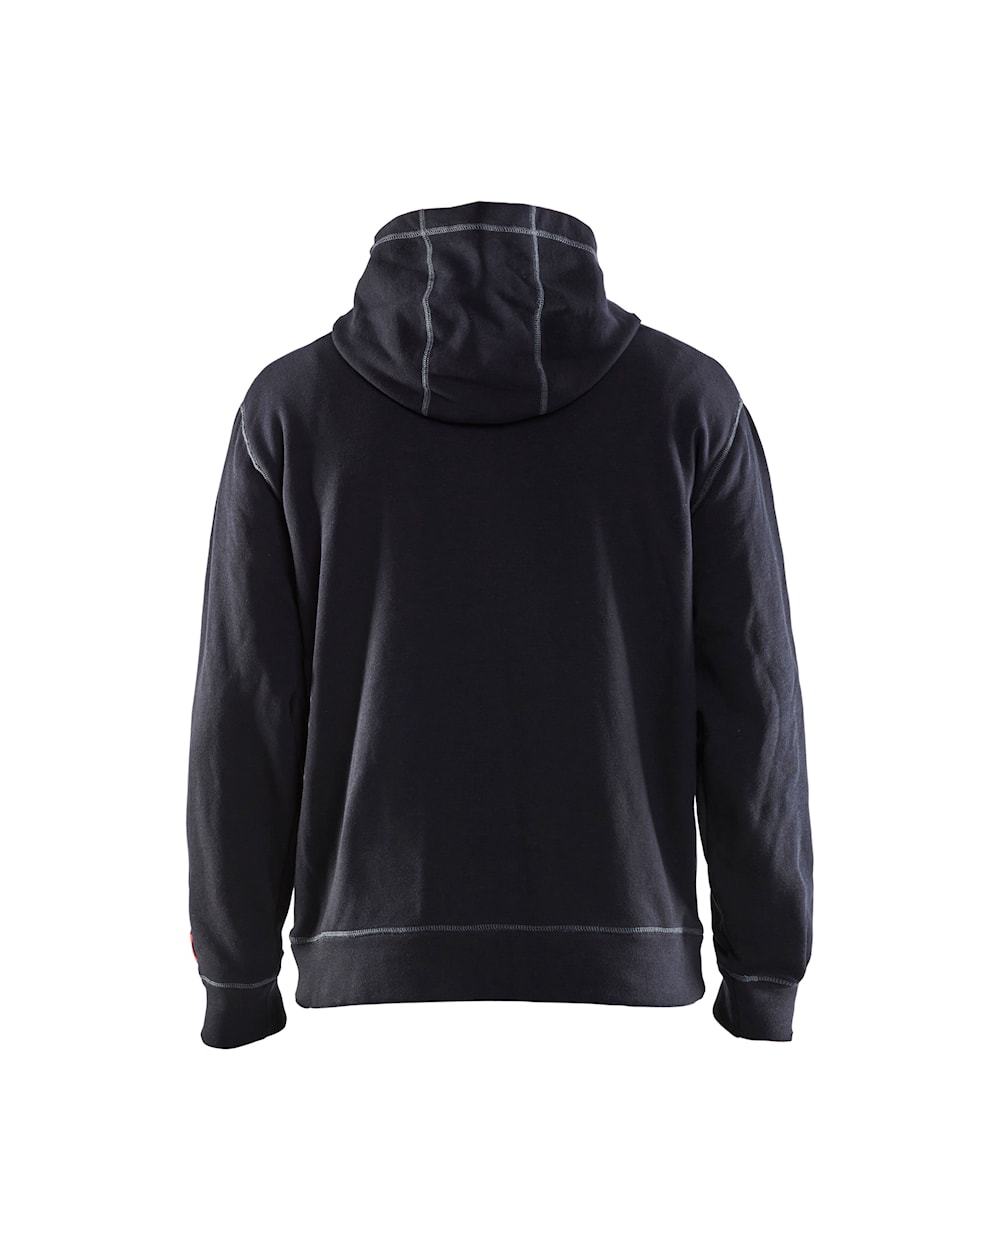 Blaklader Fire Resistant Hoodie - Large from GME Supply